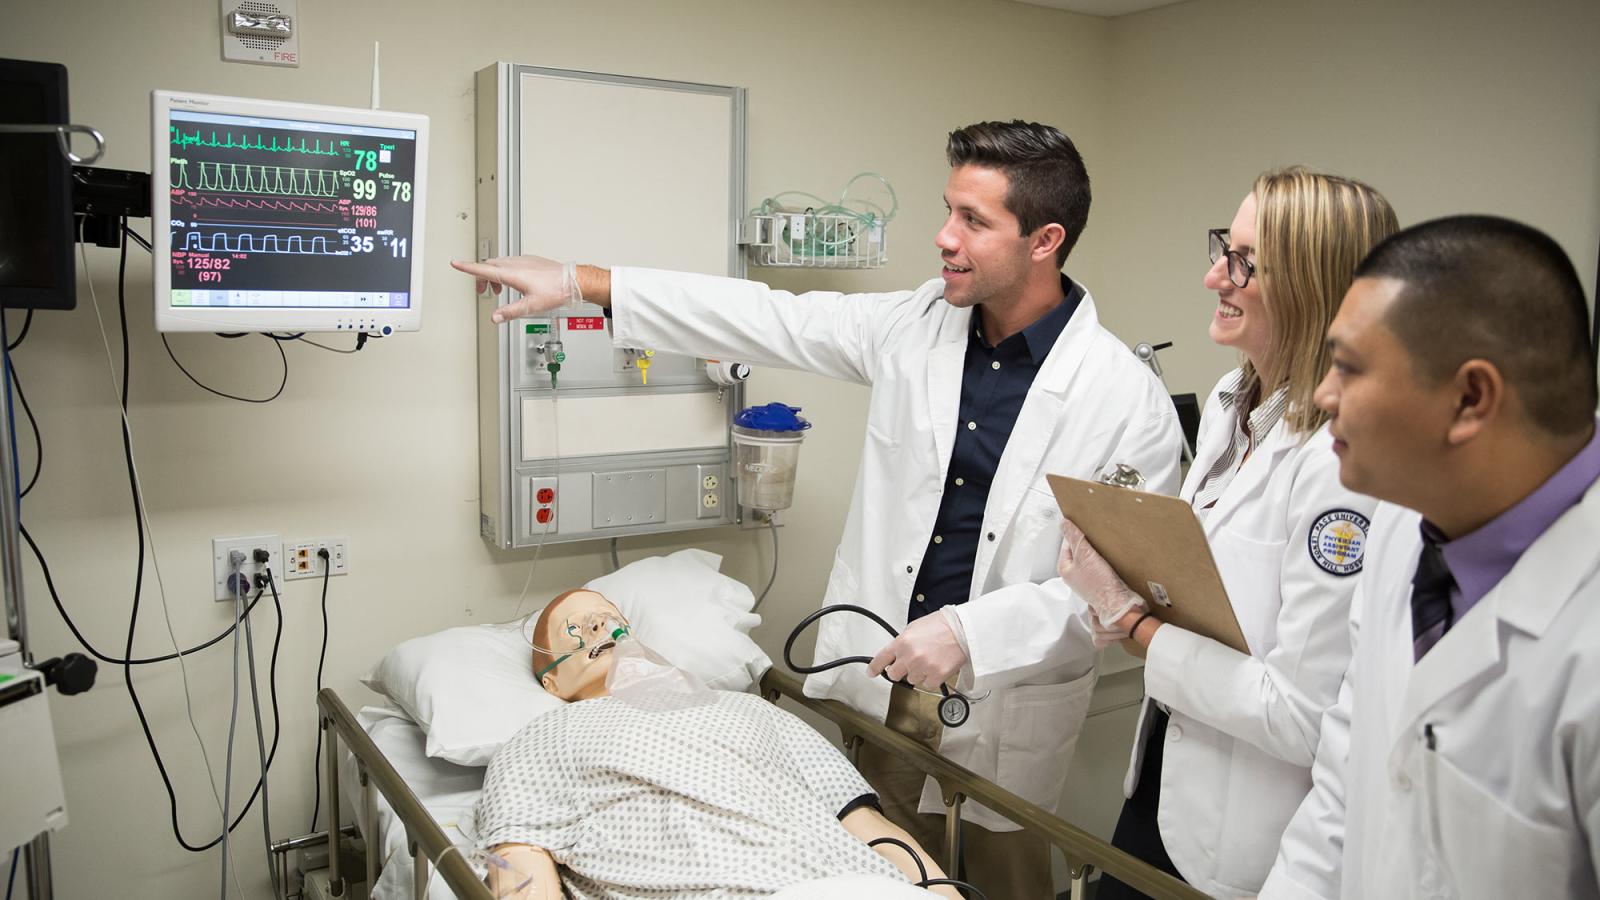 Students working with a faculty member in a clinical setting.